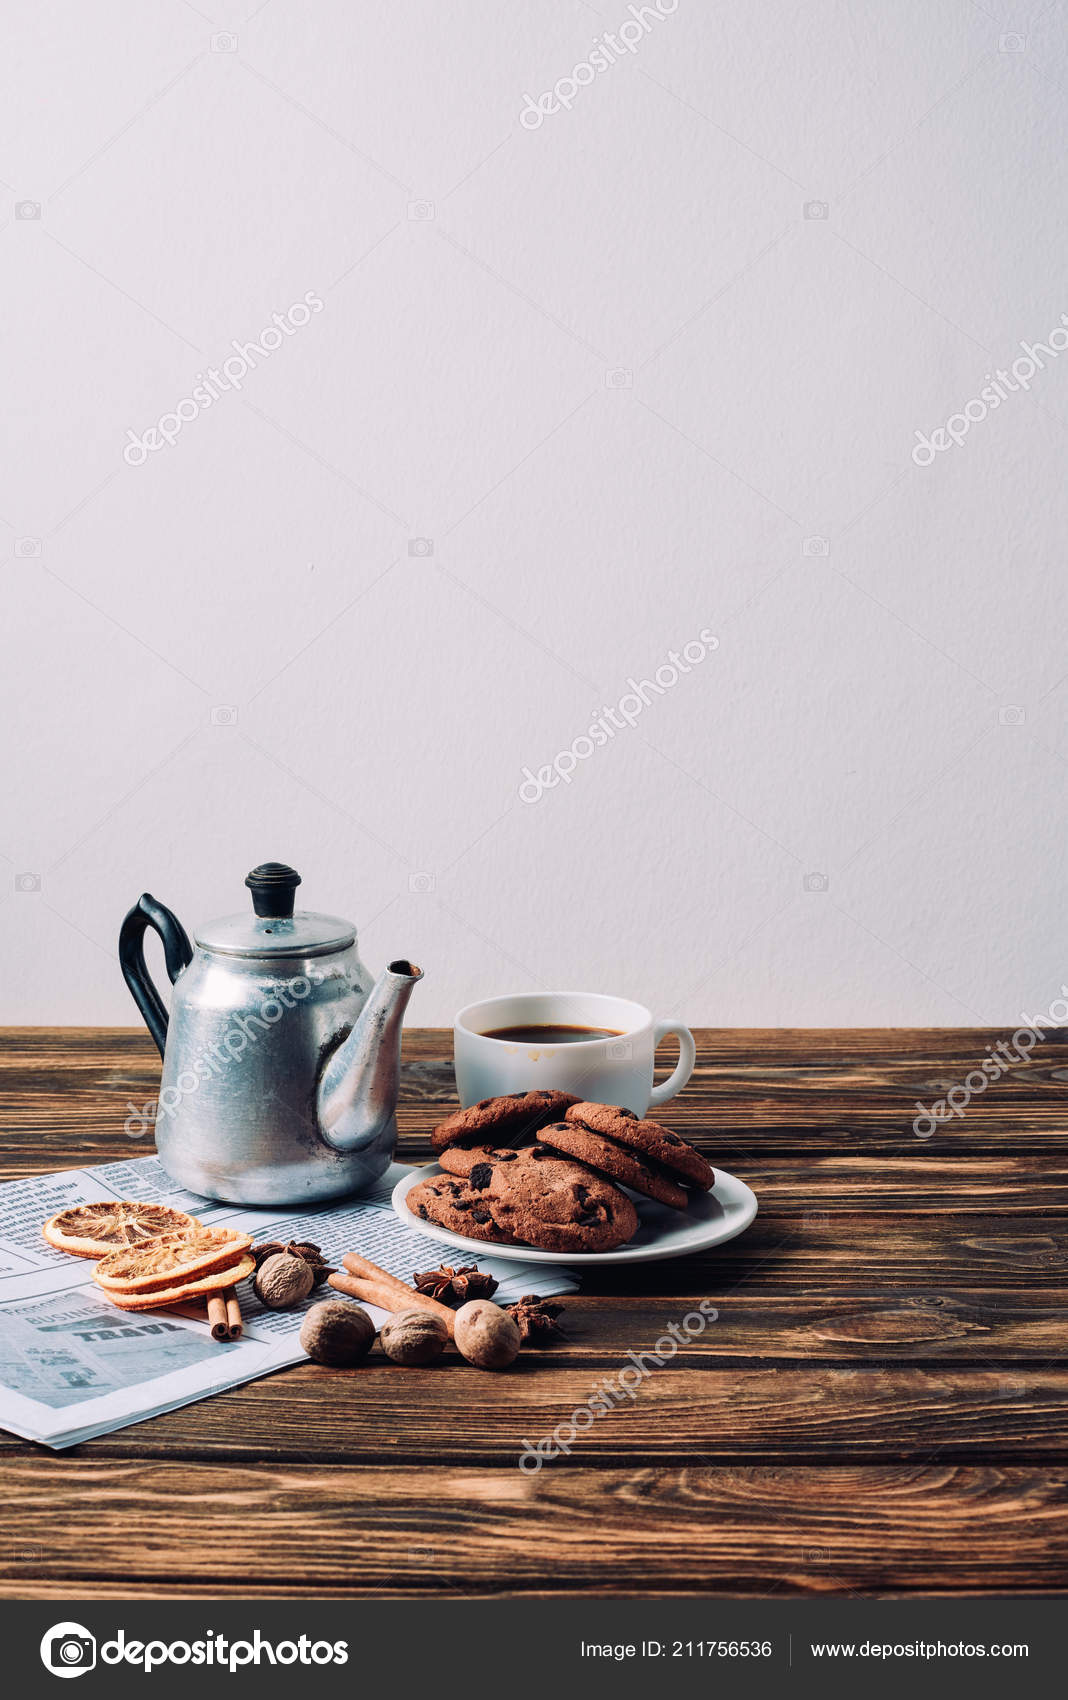 A Metal Antique Coffee Maker With Lid Stock Photo - Download Image